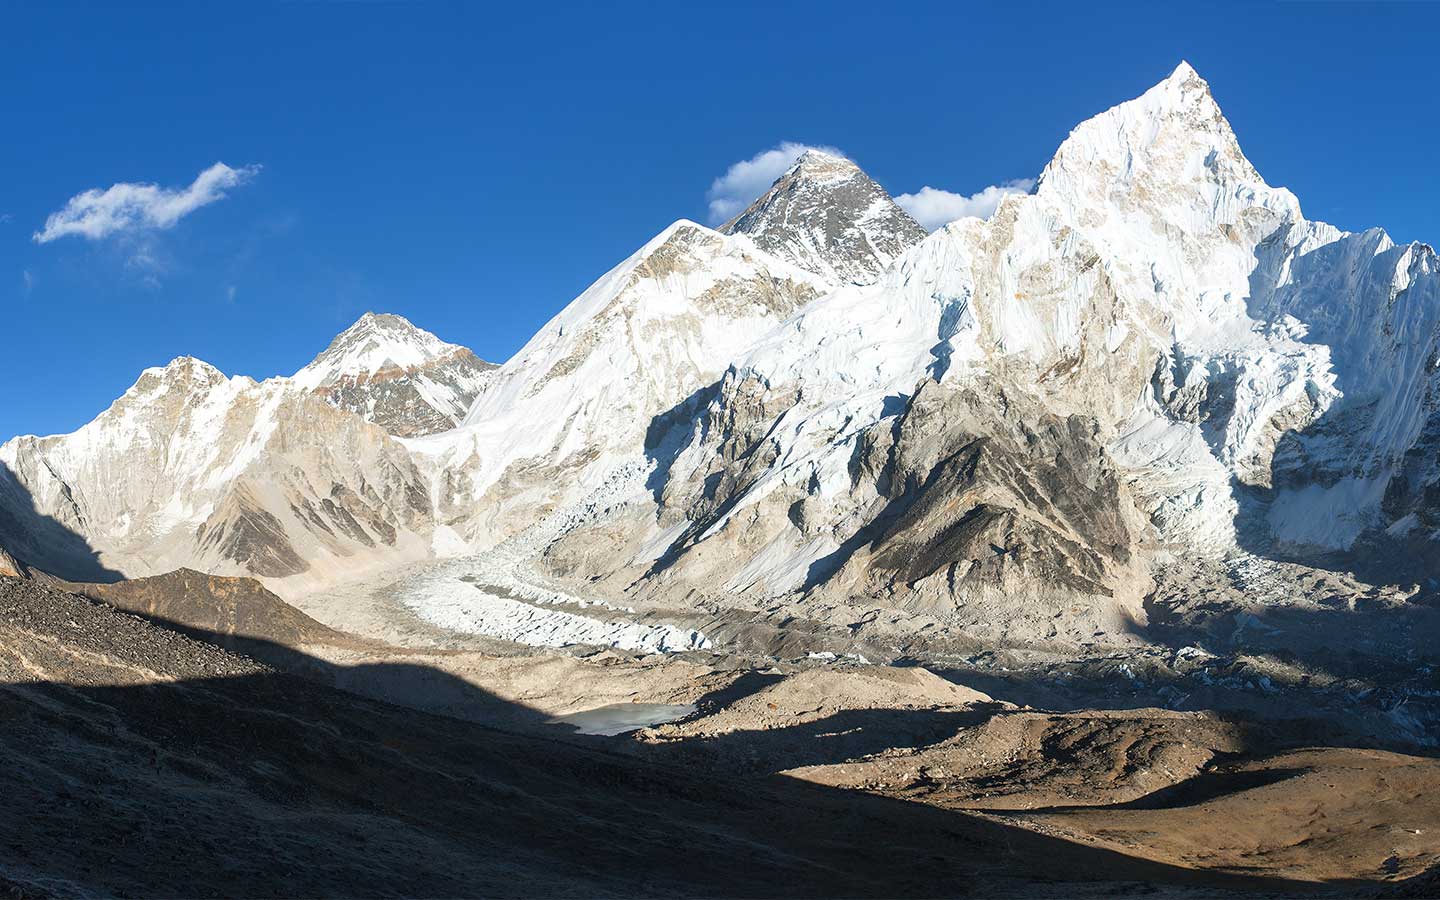 Distance from base camp to everest summit